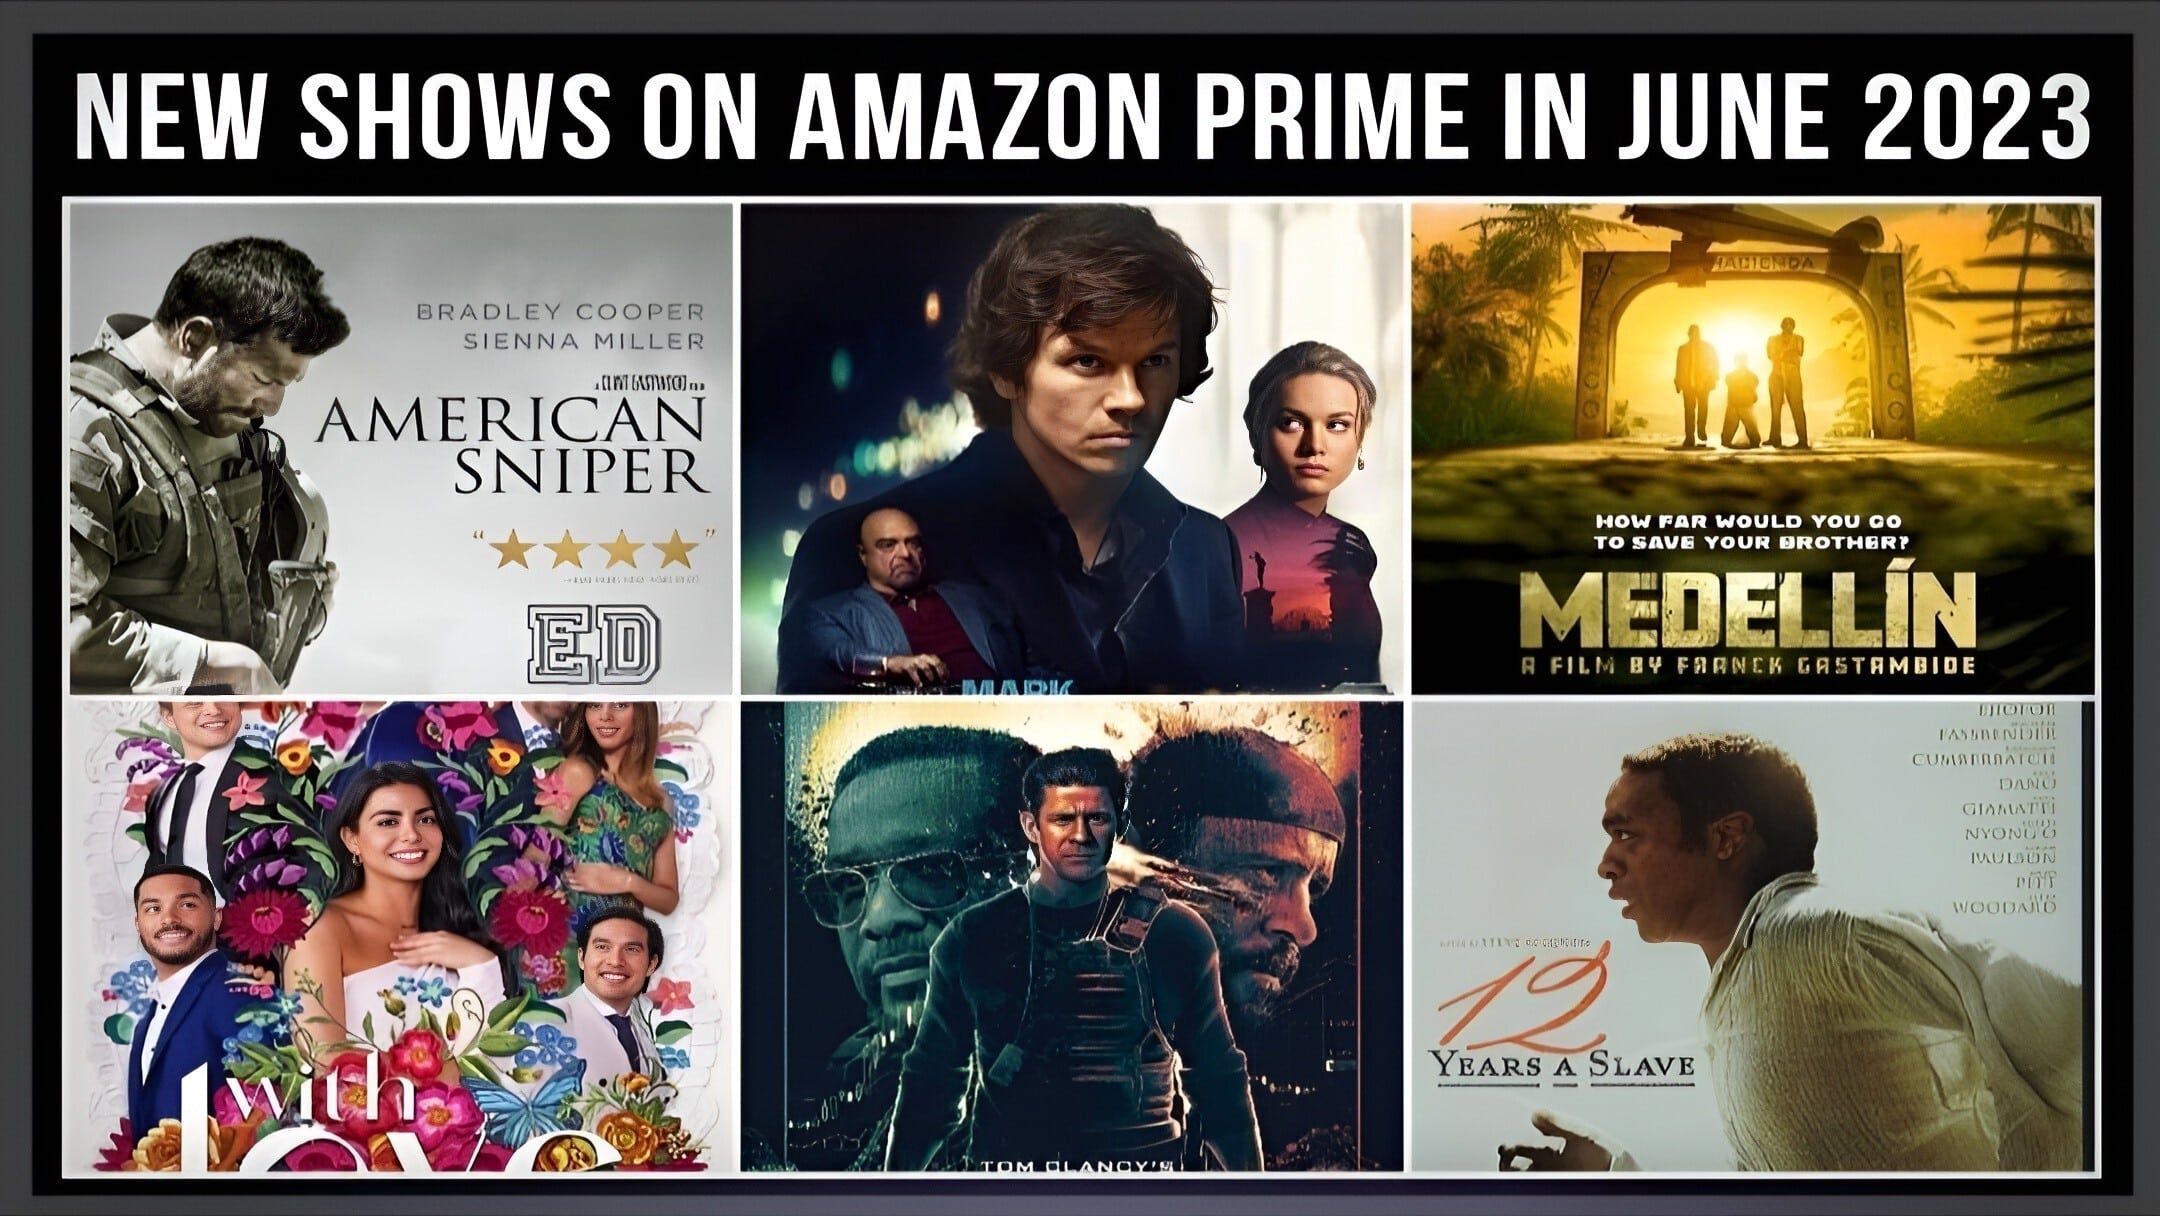 New Shows on Amazon Prime in June 2023